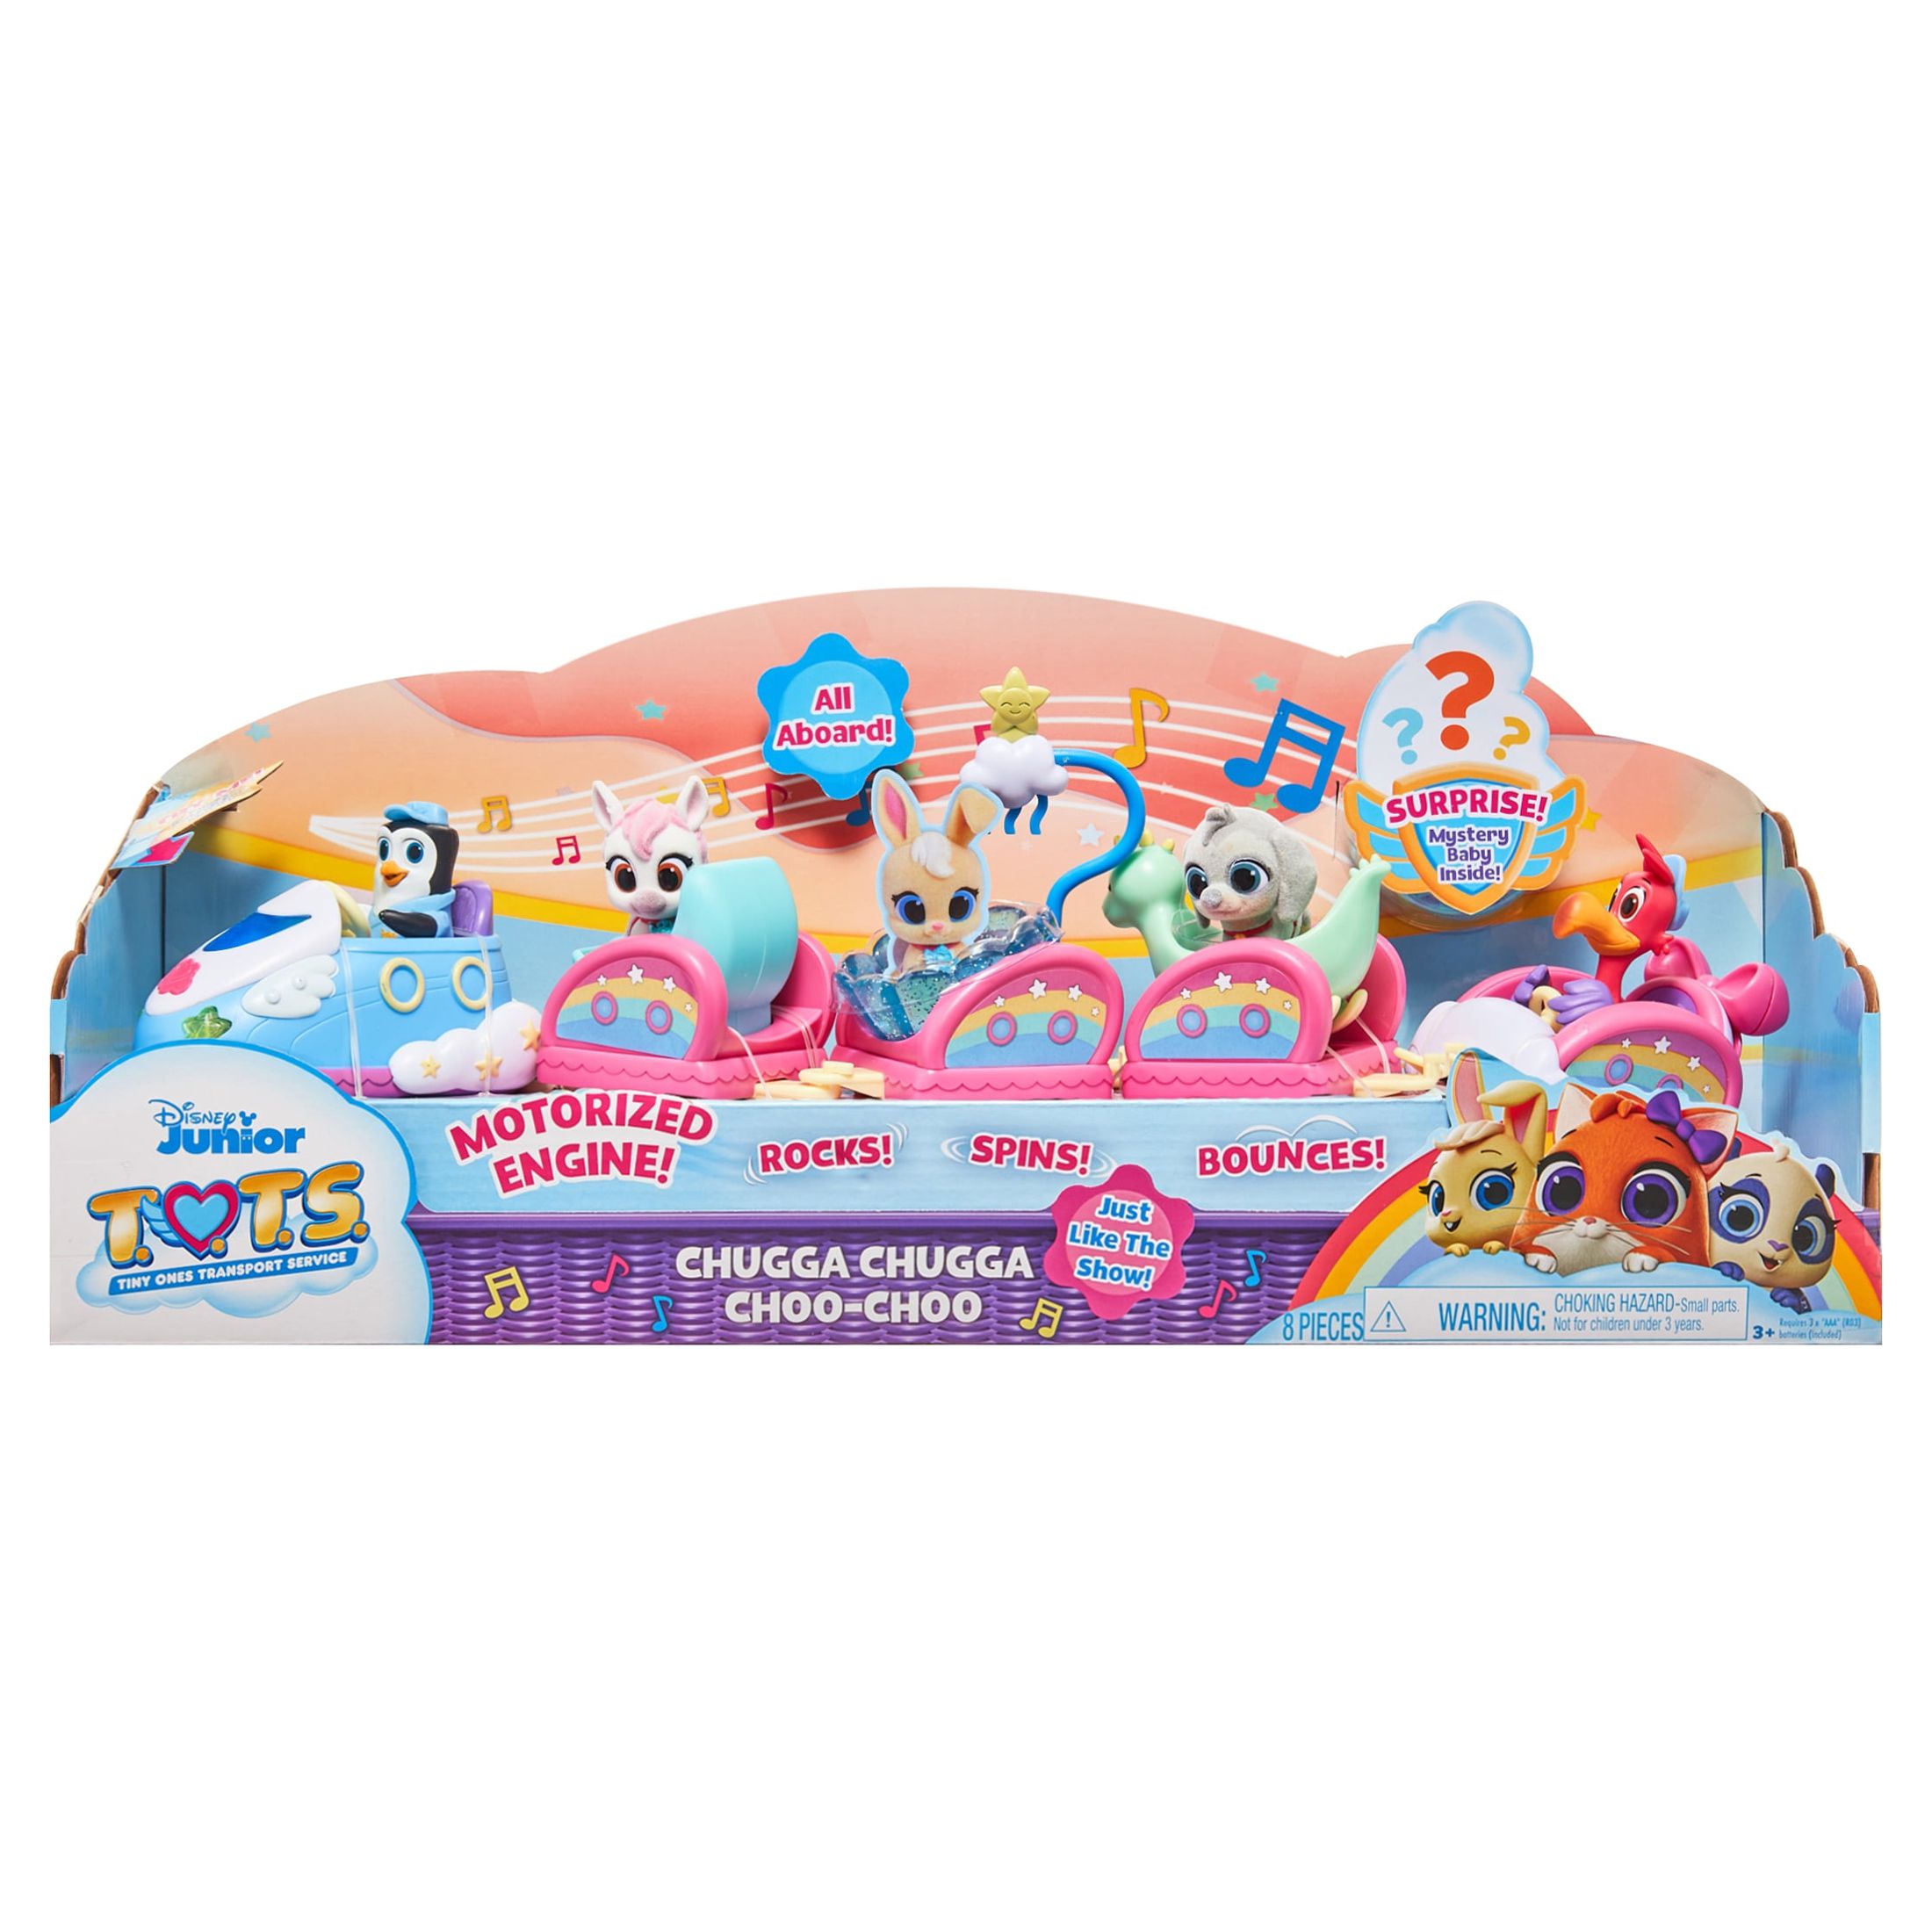 Disney Junior T.O.T.S. Chugga Chugga Choo-Choo Playset, 8 pieces, Officially Licensed Kids Toys for Ages 3 Up, Gifts and Presents - image 1 of 7